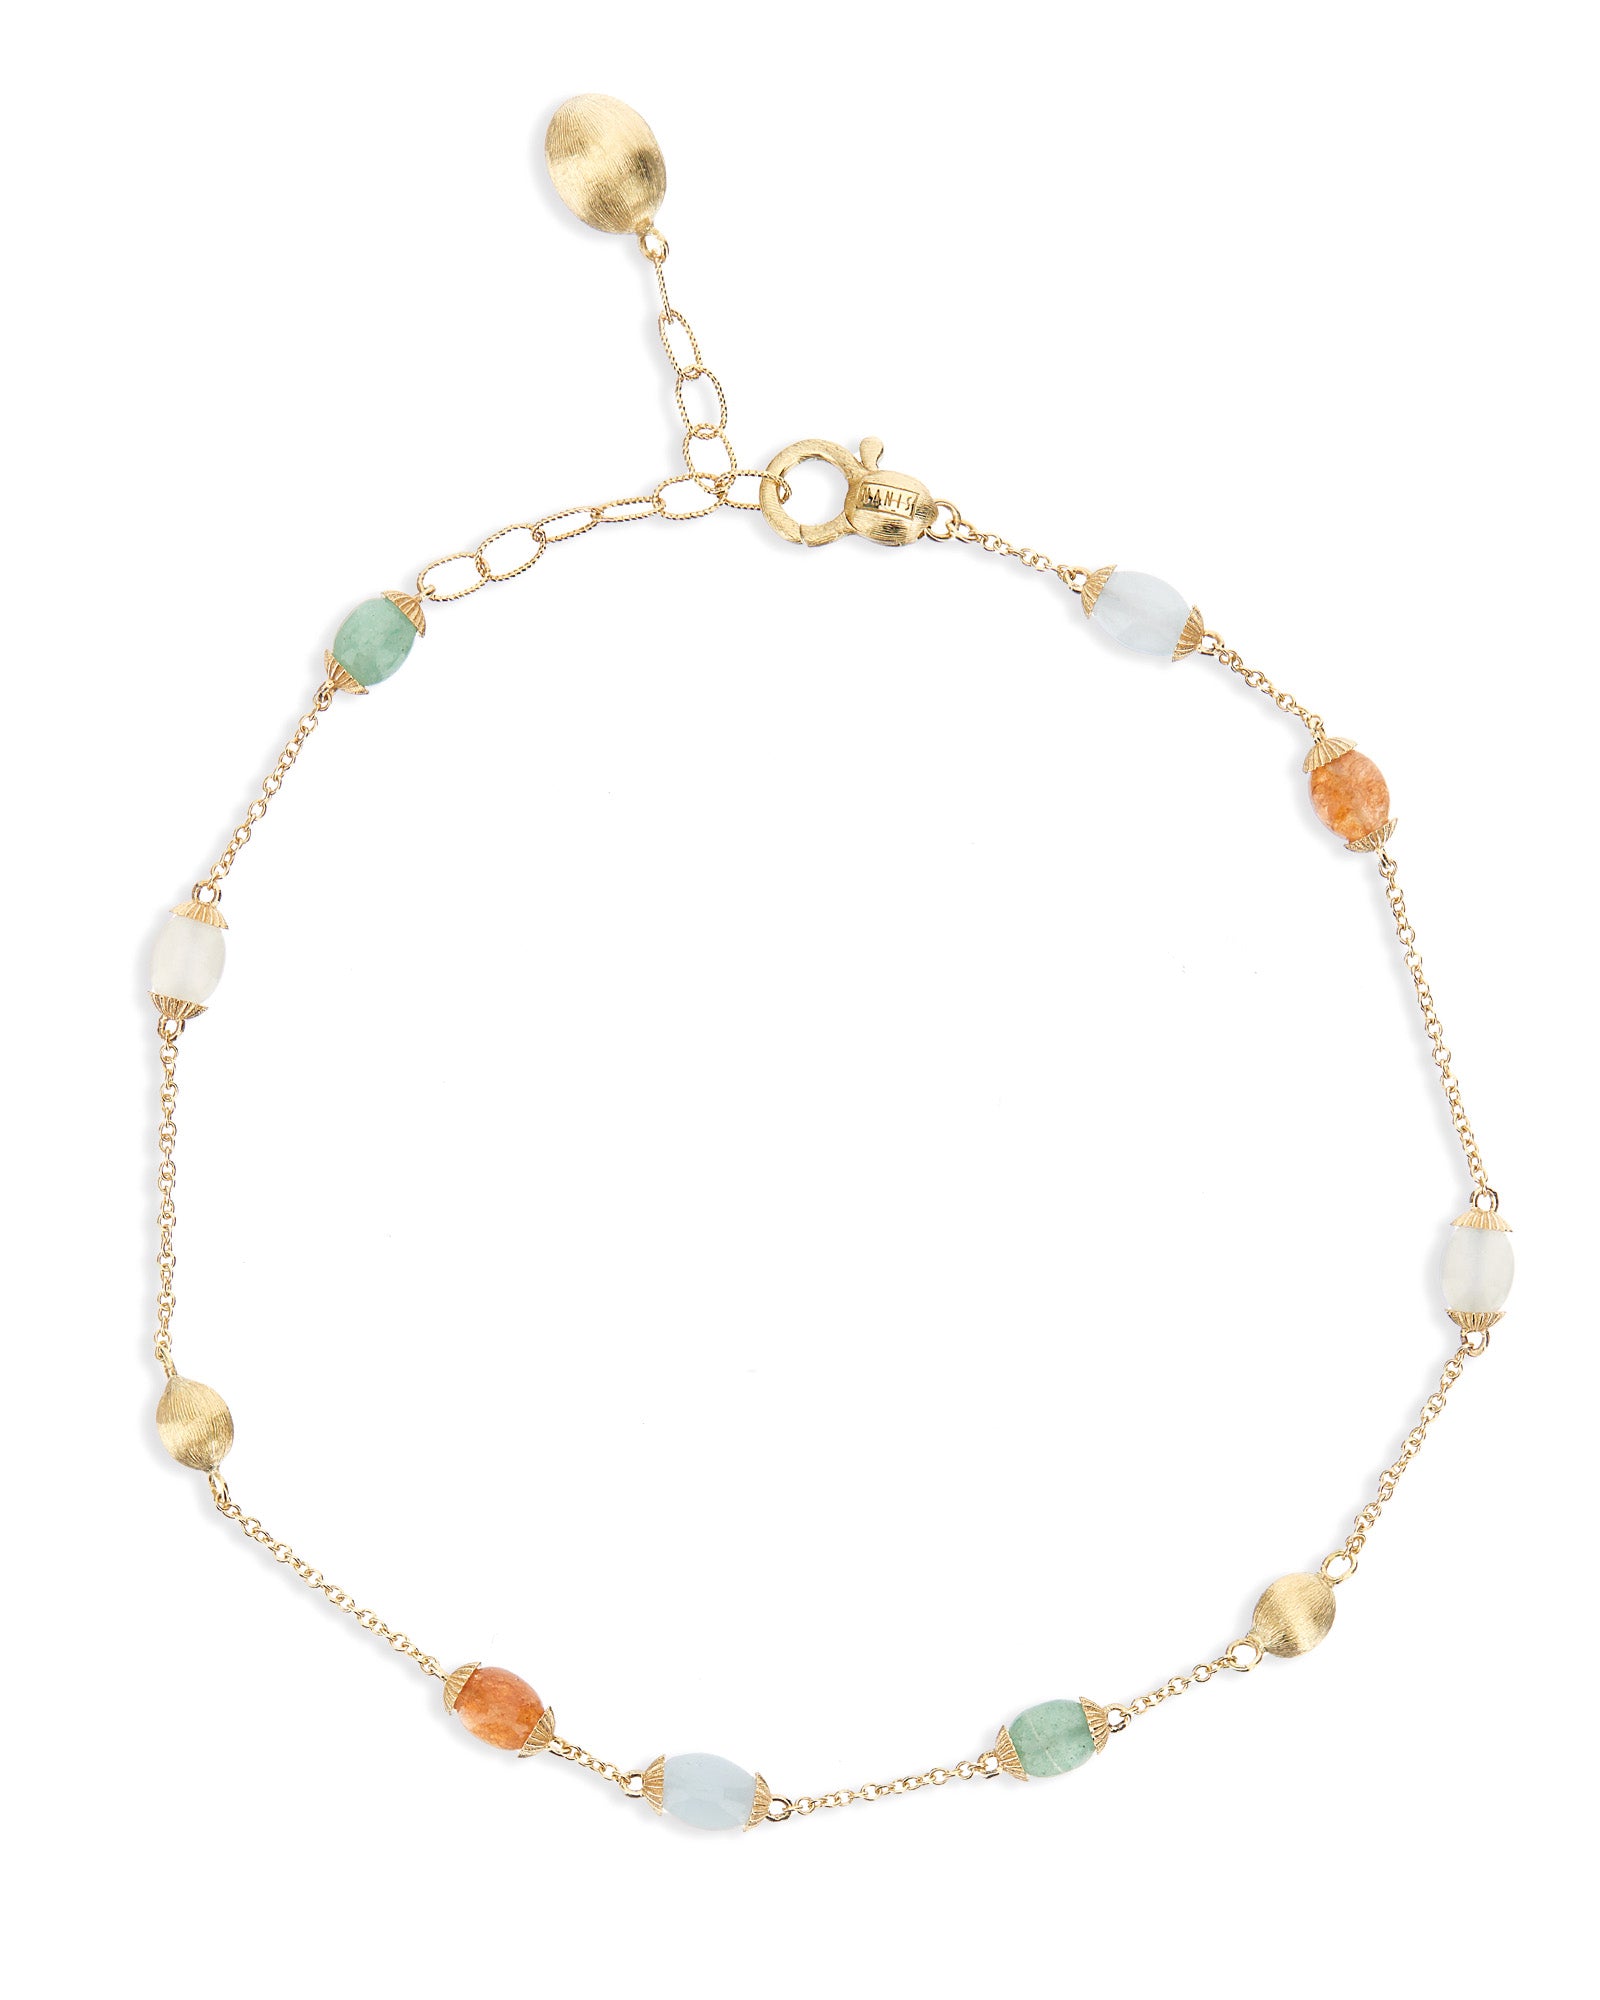 "Rainbow" gold boules and natural stones anklet